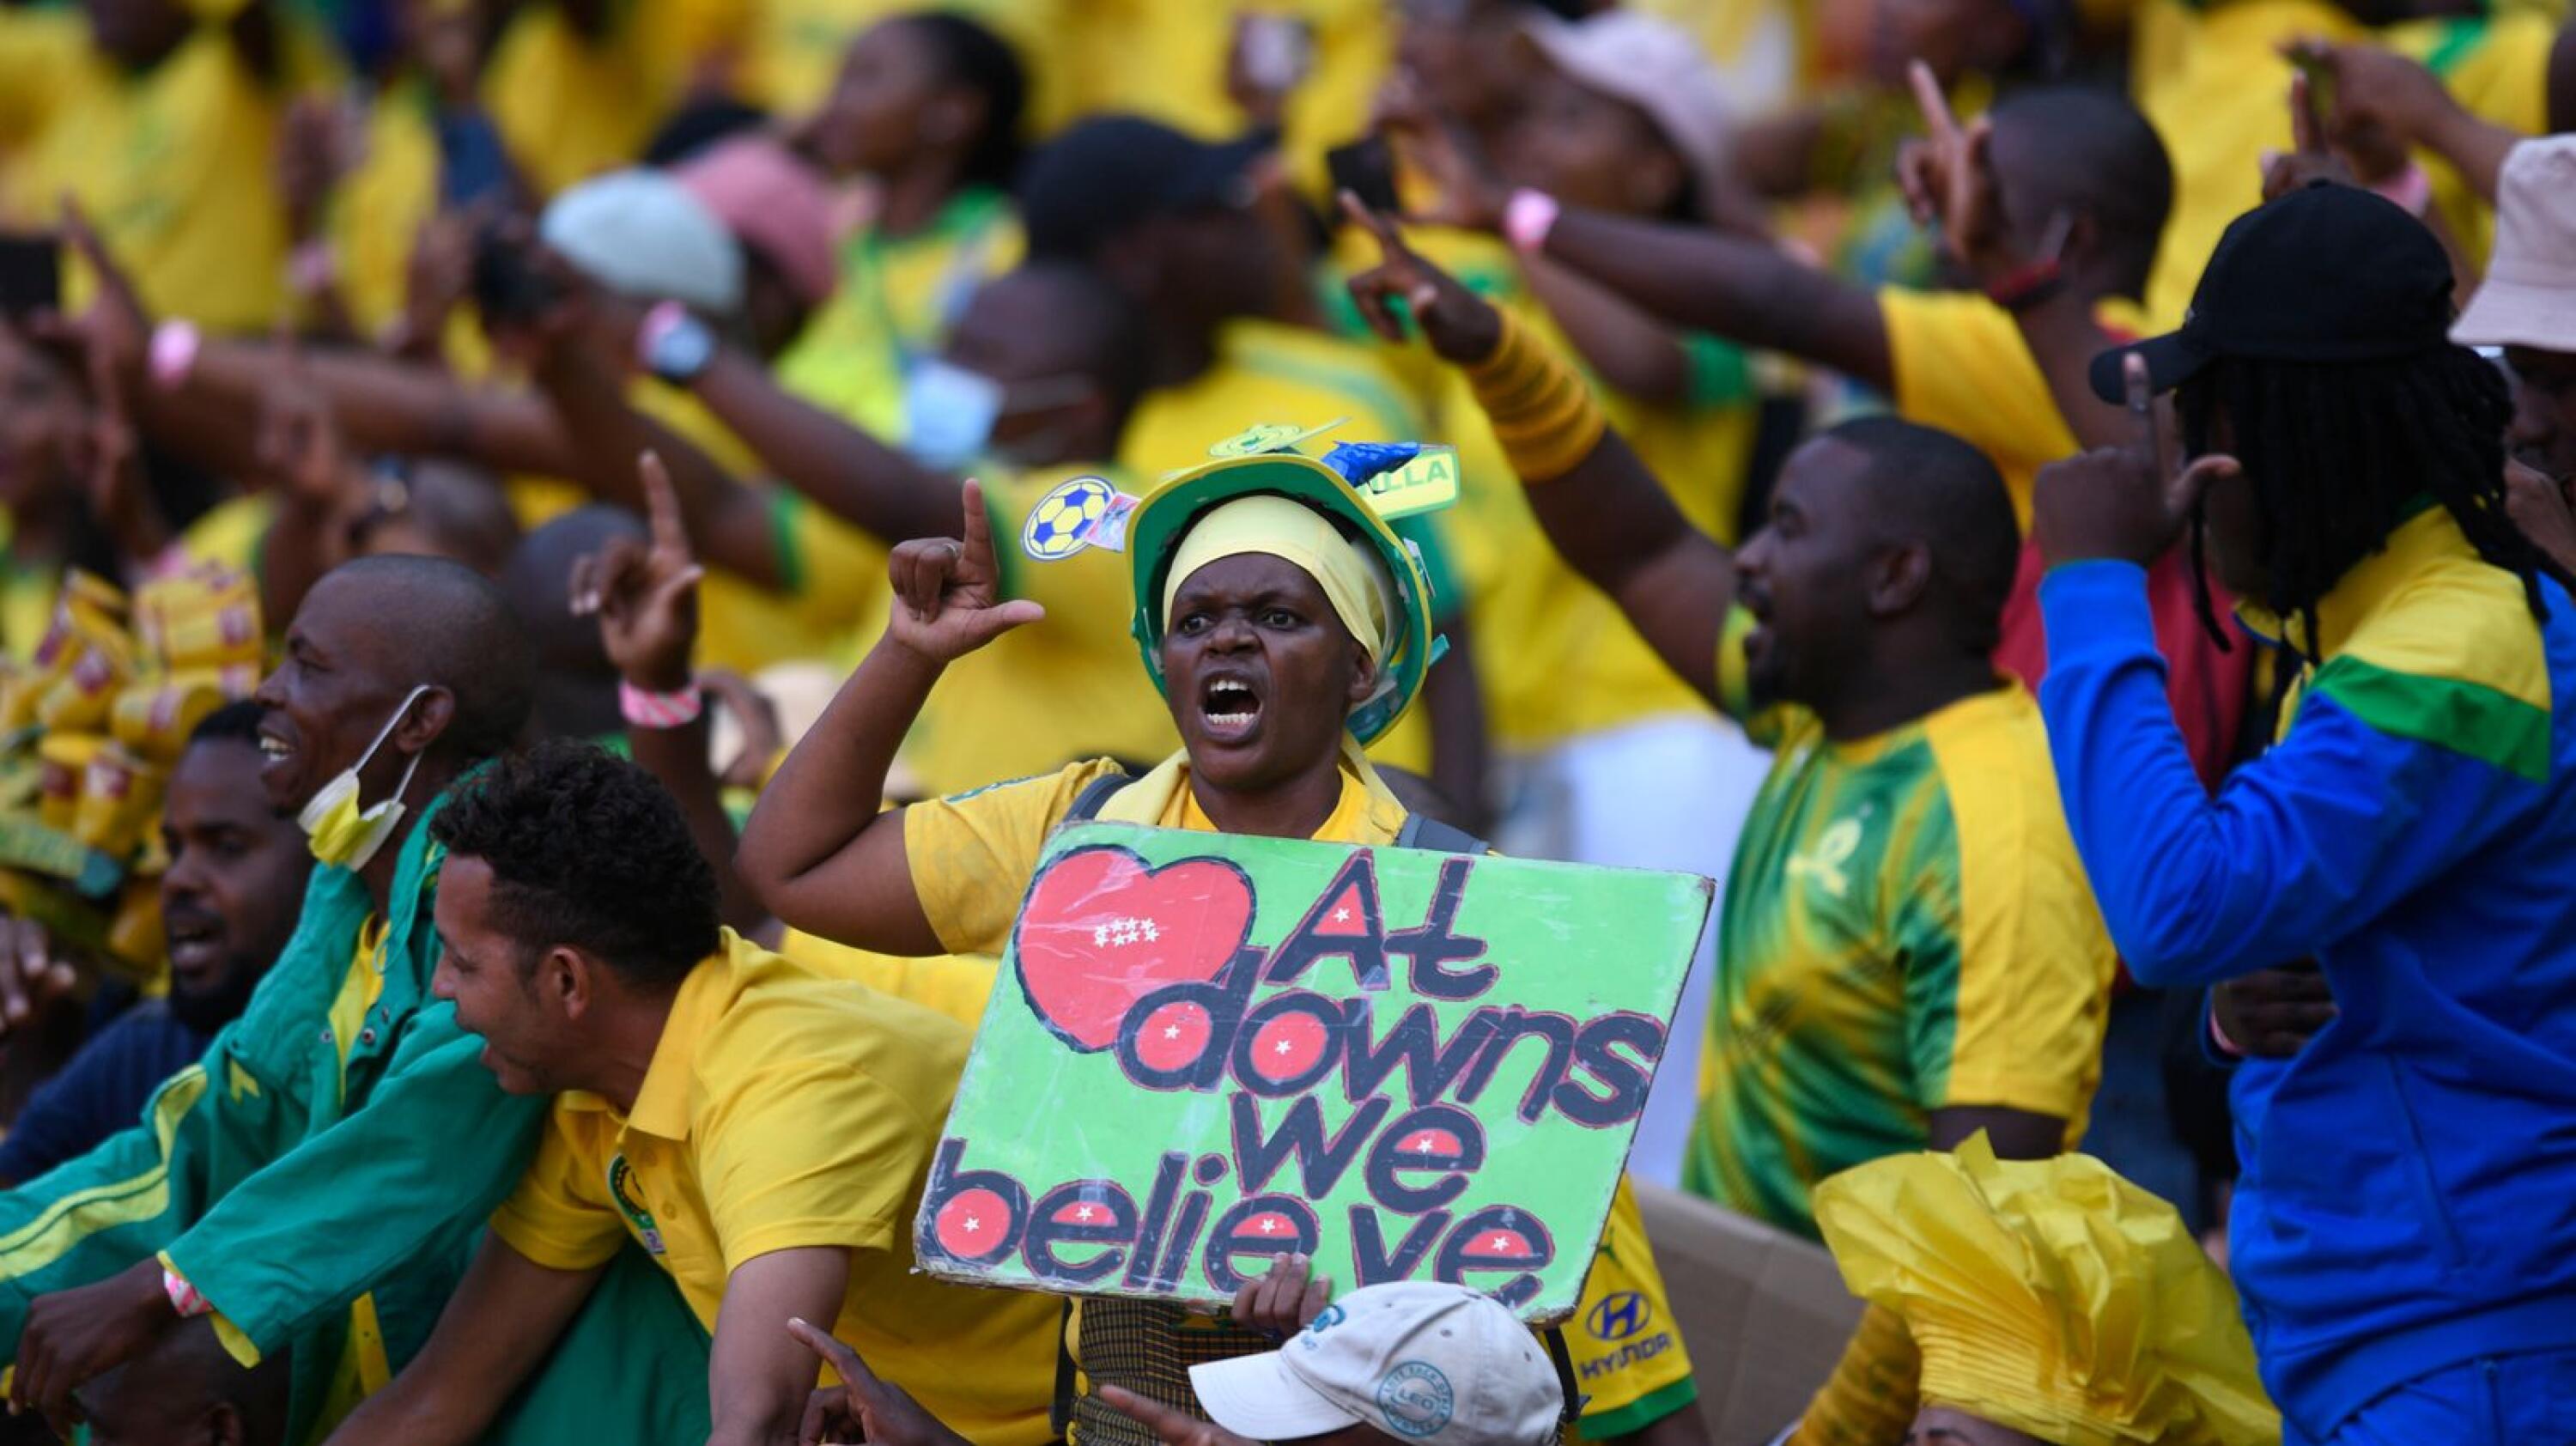 Mamelodi Sundowns supporters celebrate in the stands during their CAF Champions League match against Al Ahly at FNB Stadium in Soweto on Saturday